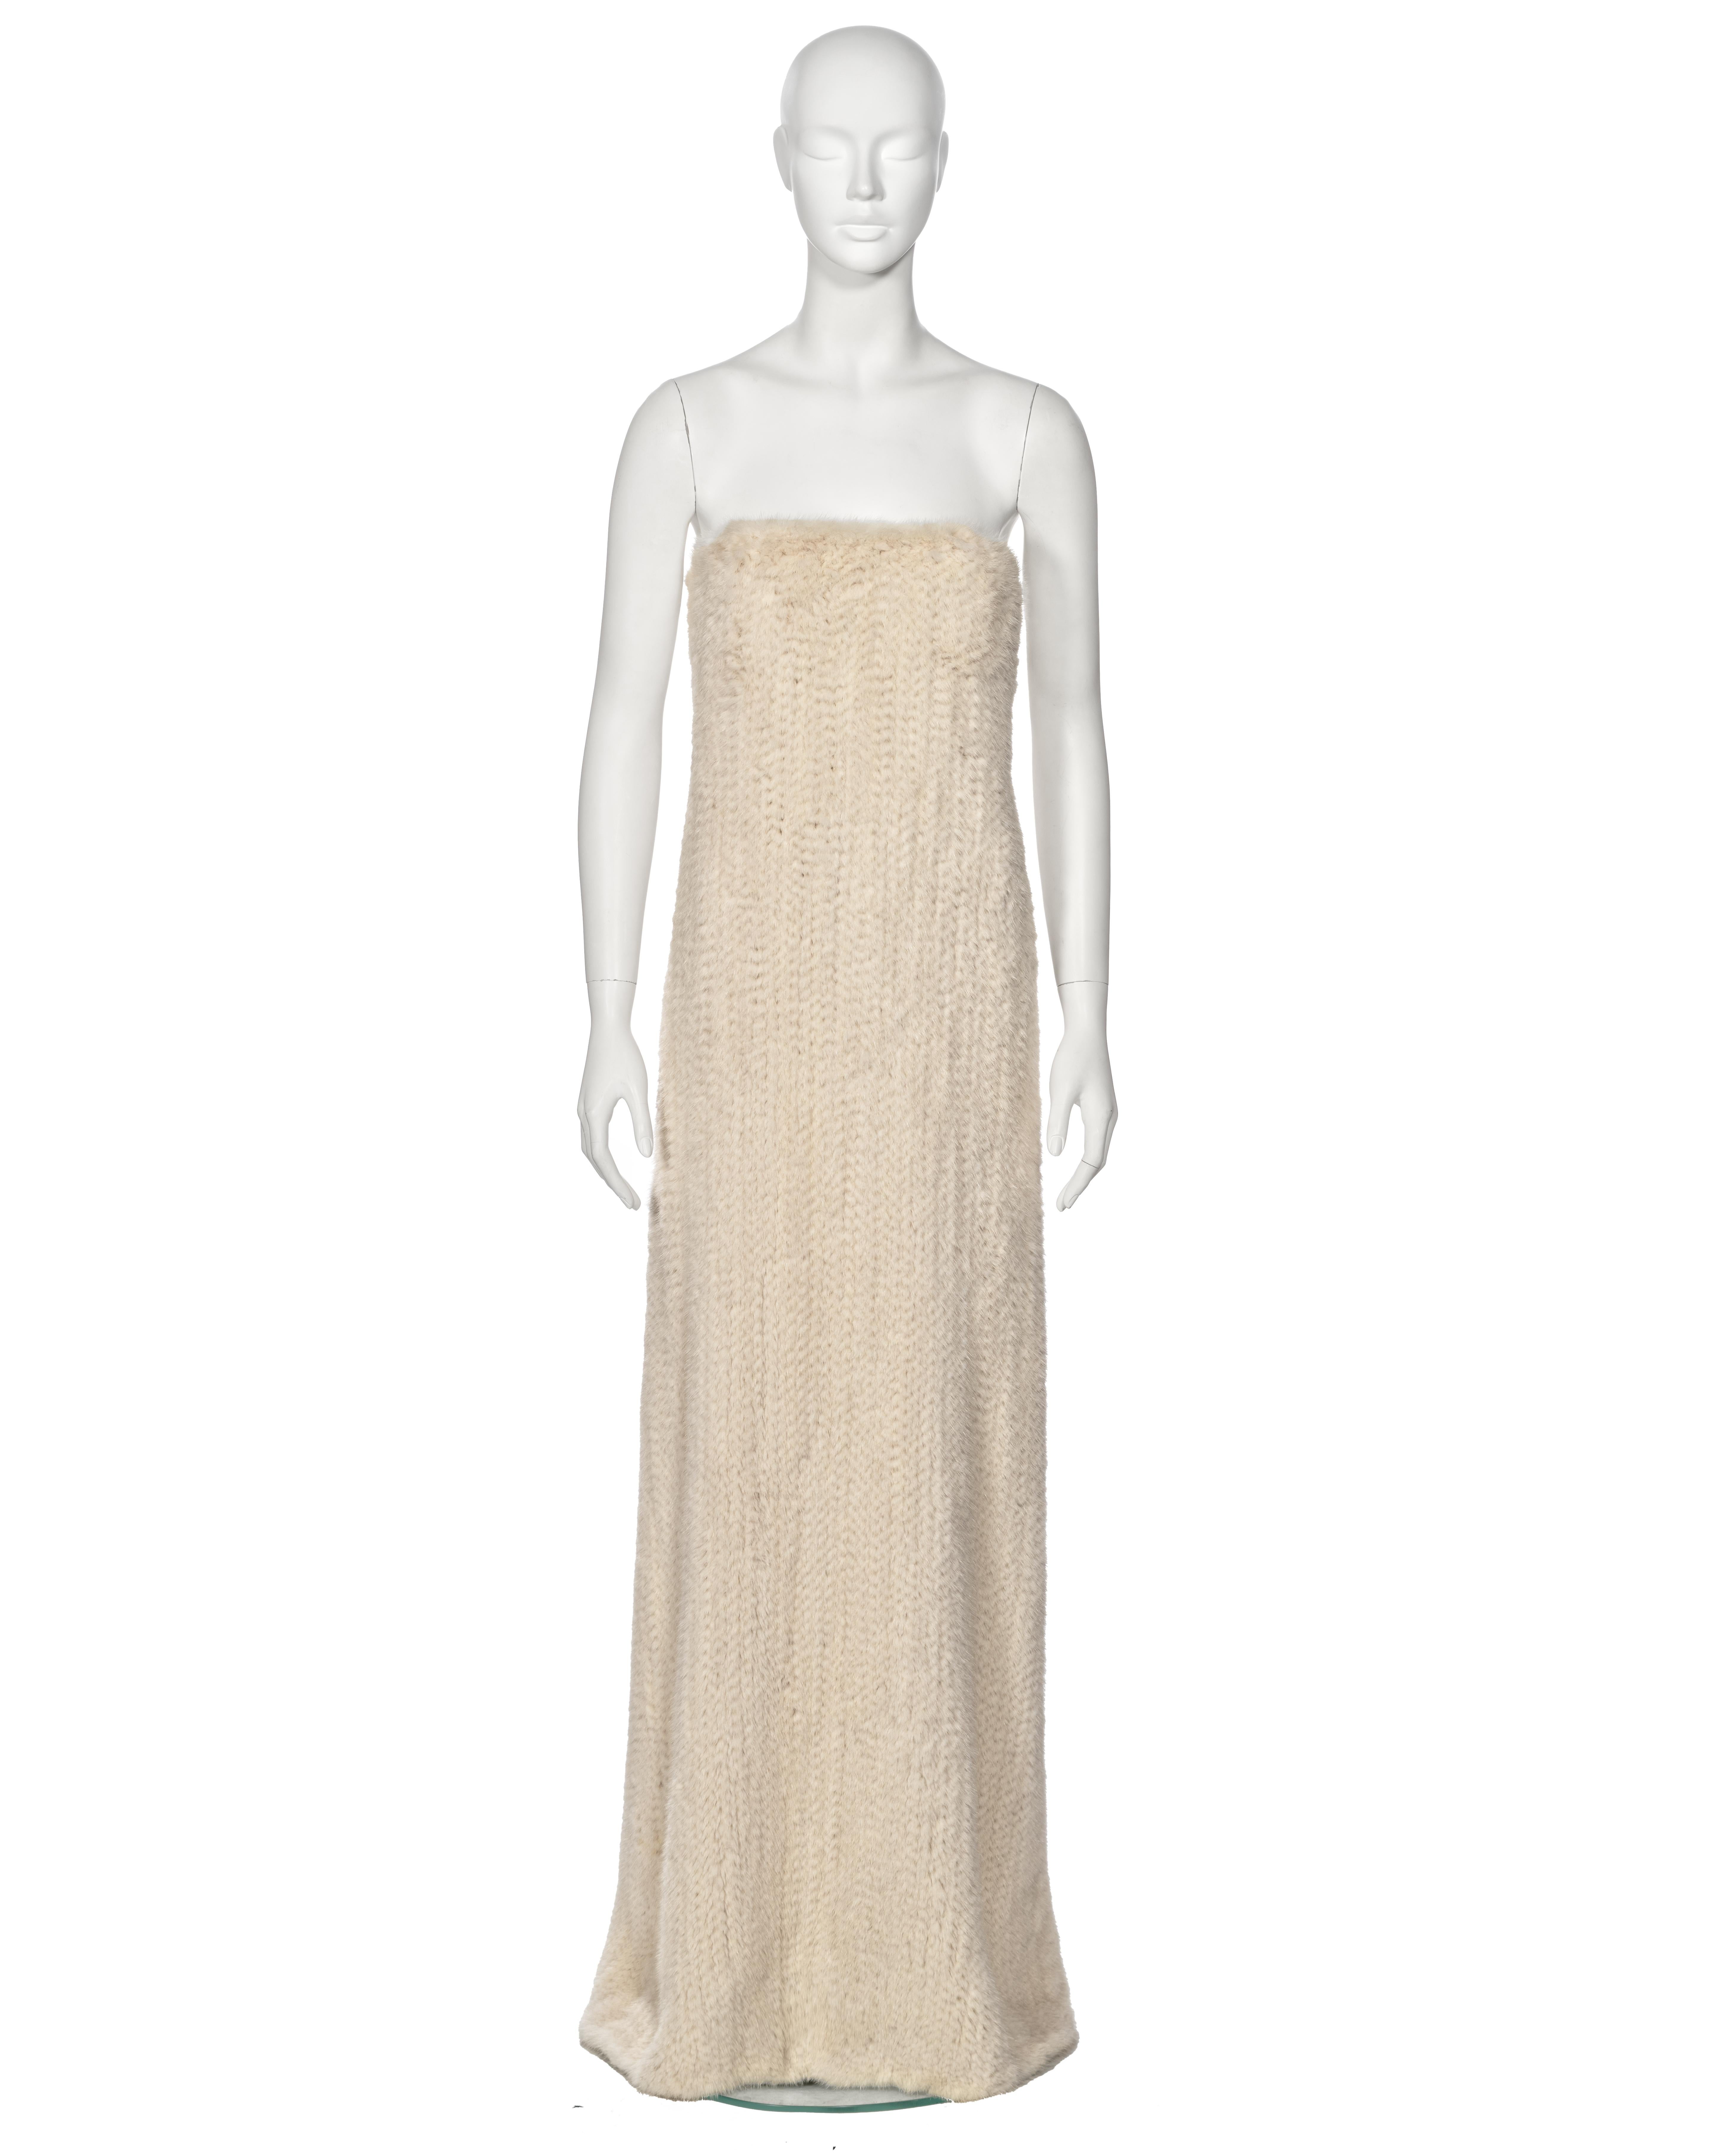 ▪ Mila Schön White Mink Fur Dress
▪ Fall-Winter 1999 Collection
▪ Sold by One of a Kind Archive
▪ Crafted from knitted white mink fur
▪ Strapless bodice featuring built-in support
▪ Elegant floor length
▪ Straight, relaxed silhouette
▪ Side seam zip